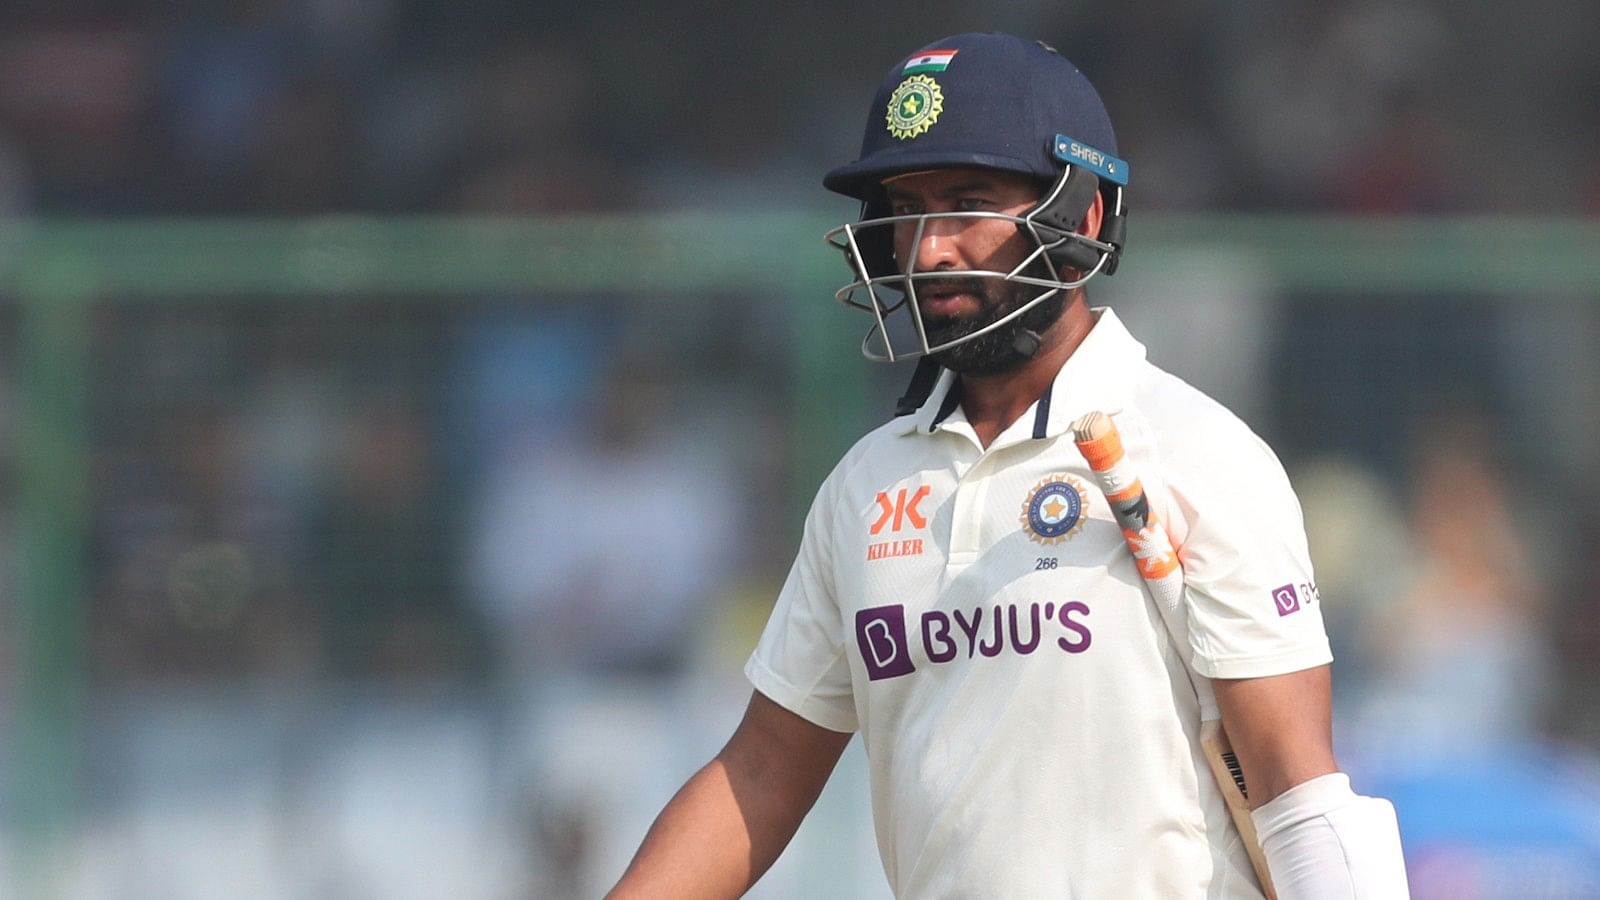 Axed From Indian Test Team for West Indies Series, Cheteshwar Pujara Responds With Century in Duleep Trophy